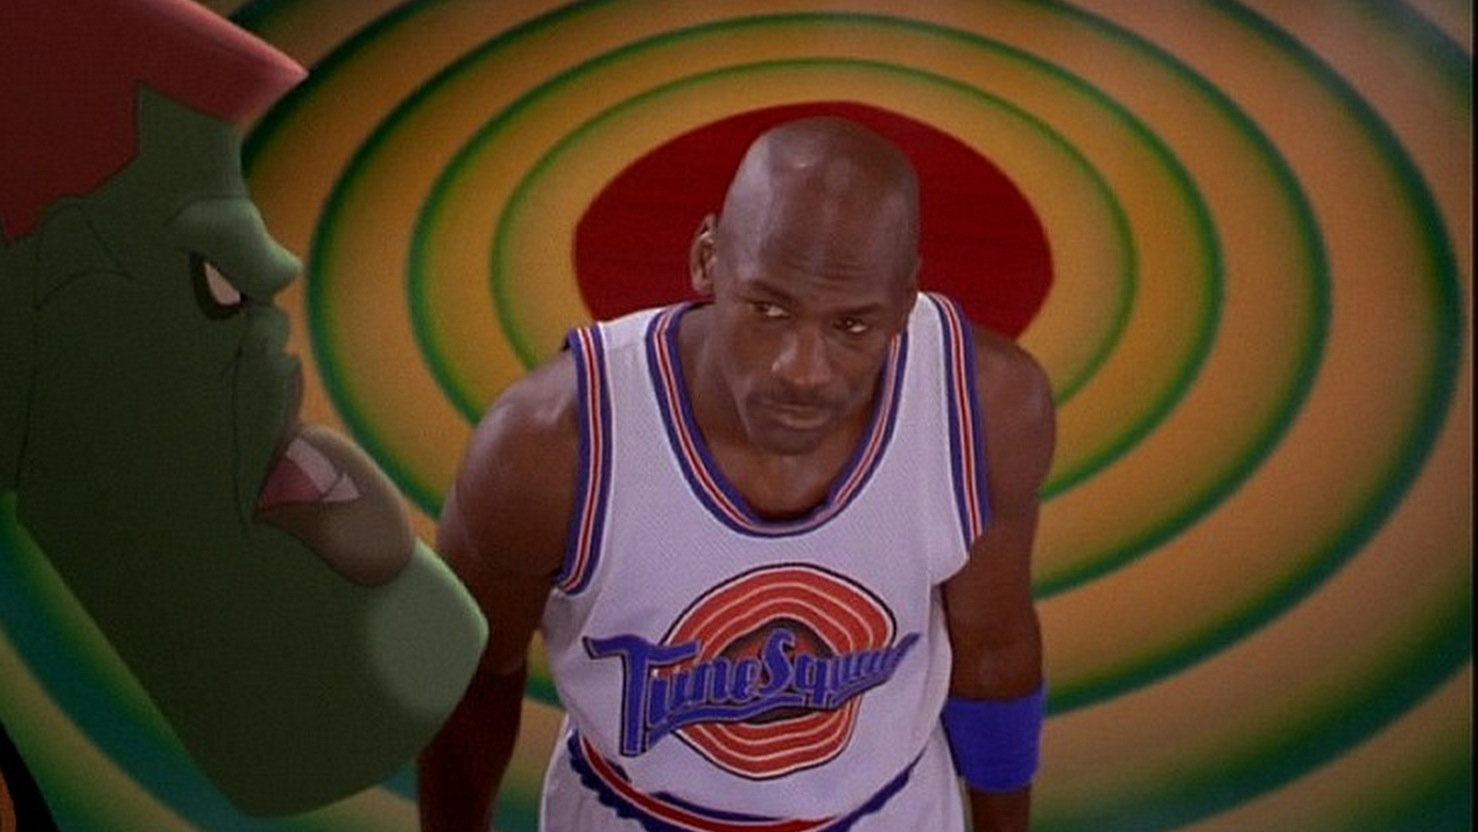 Michael Jordan's Tune Squad jersey from 'Space Jam' is going up for auction